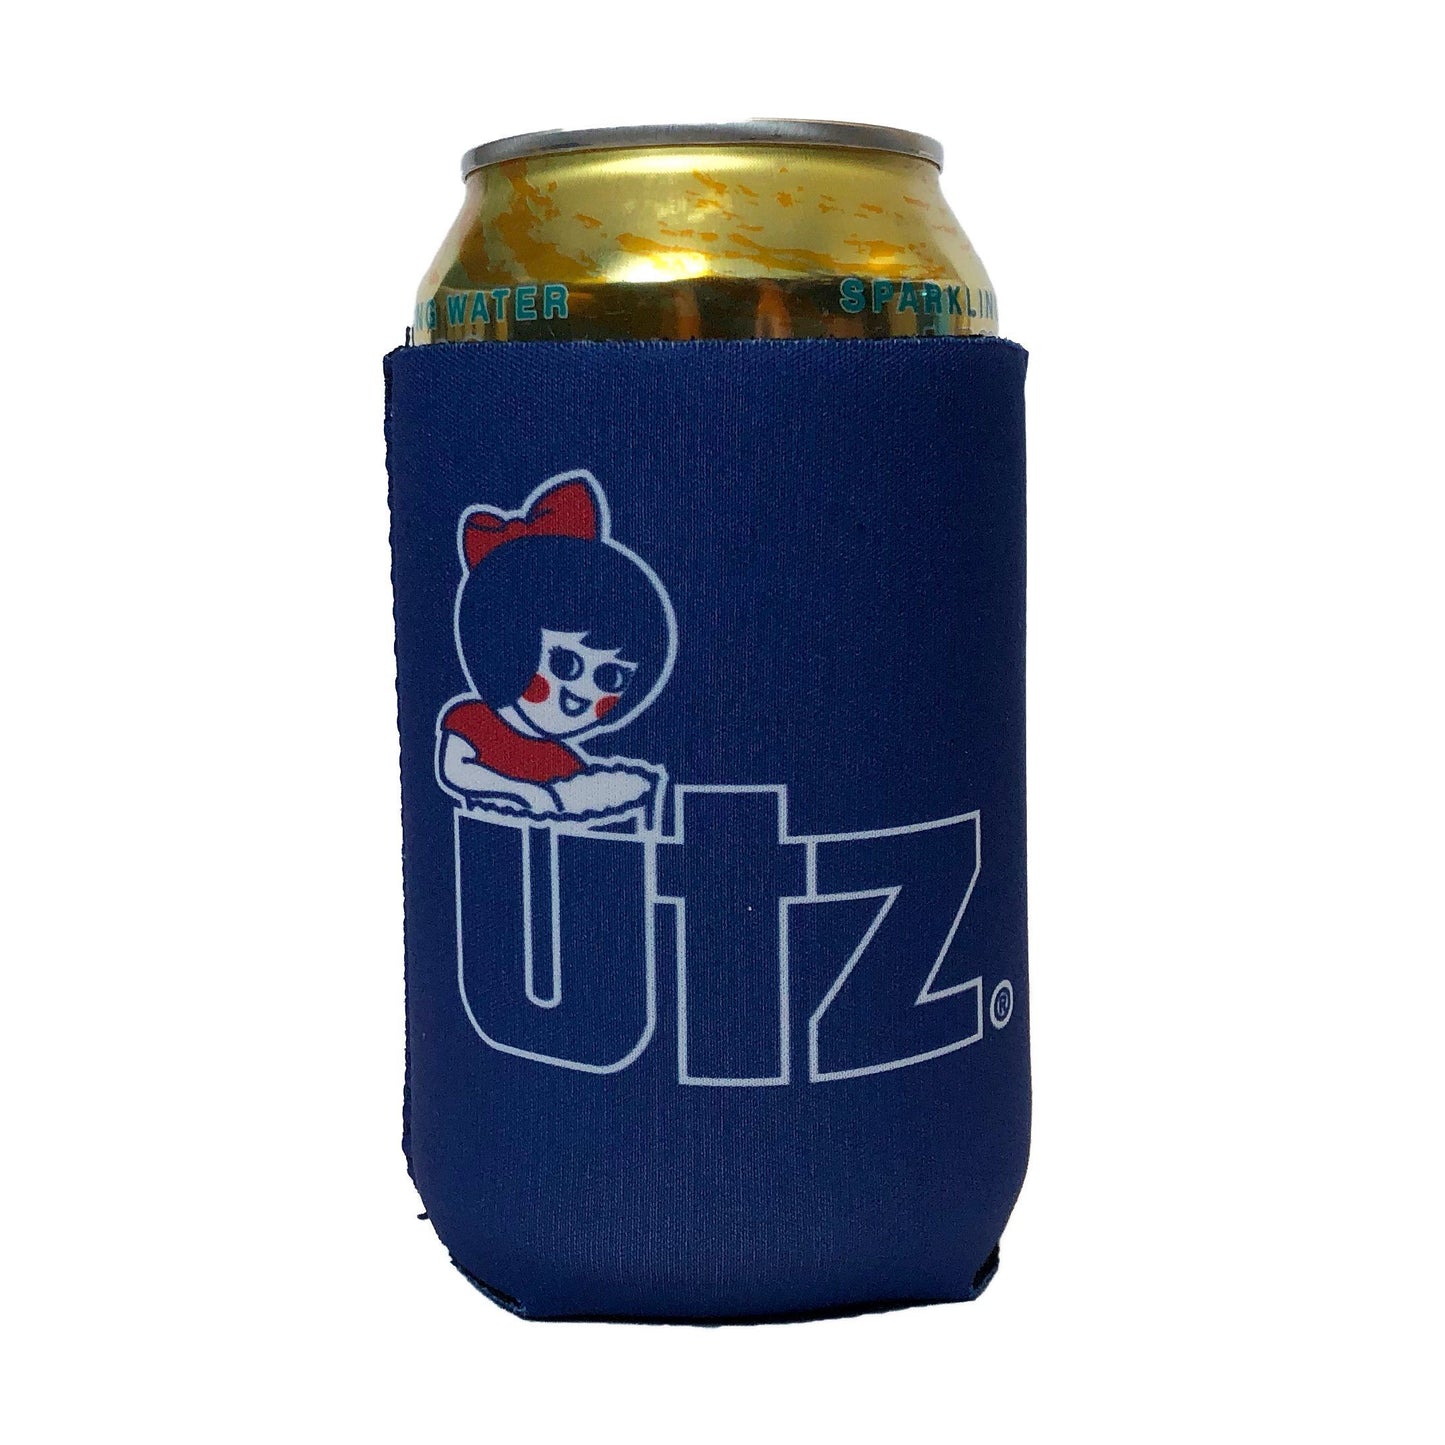 Utz Logo (Blue) / Can Cooler - Route One Apparel